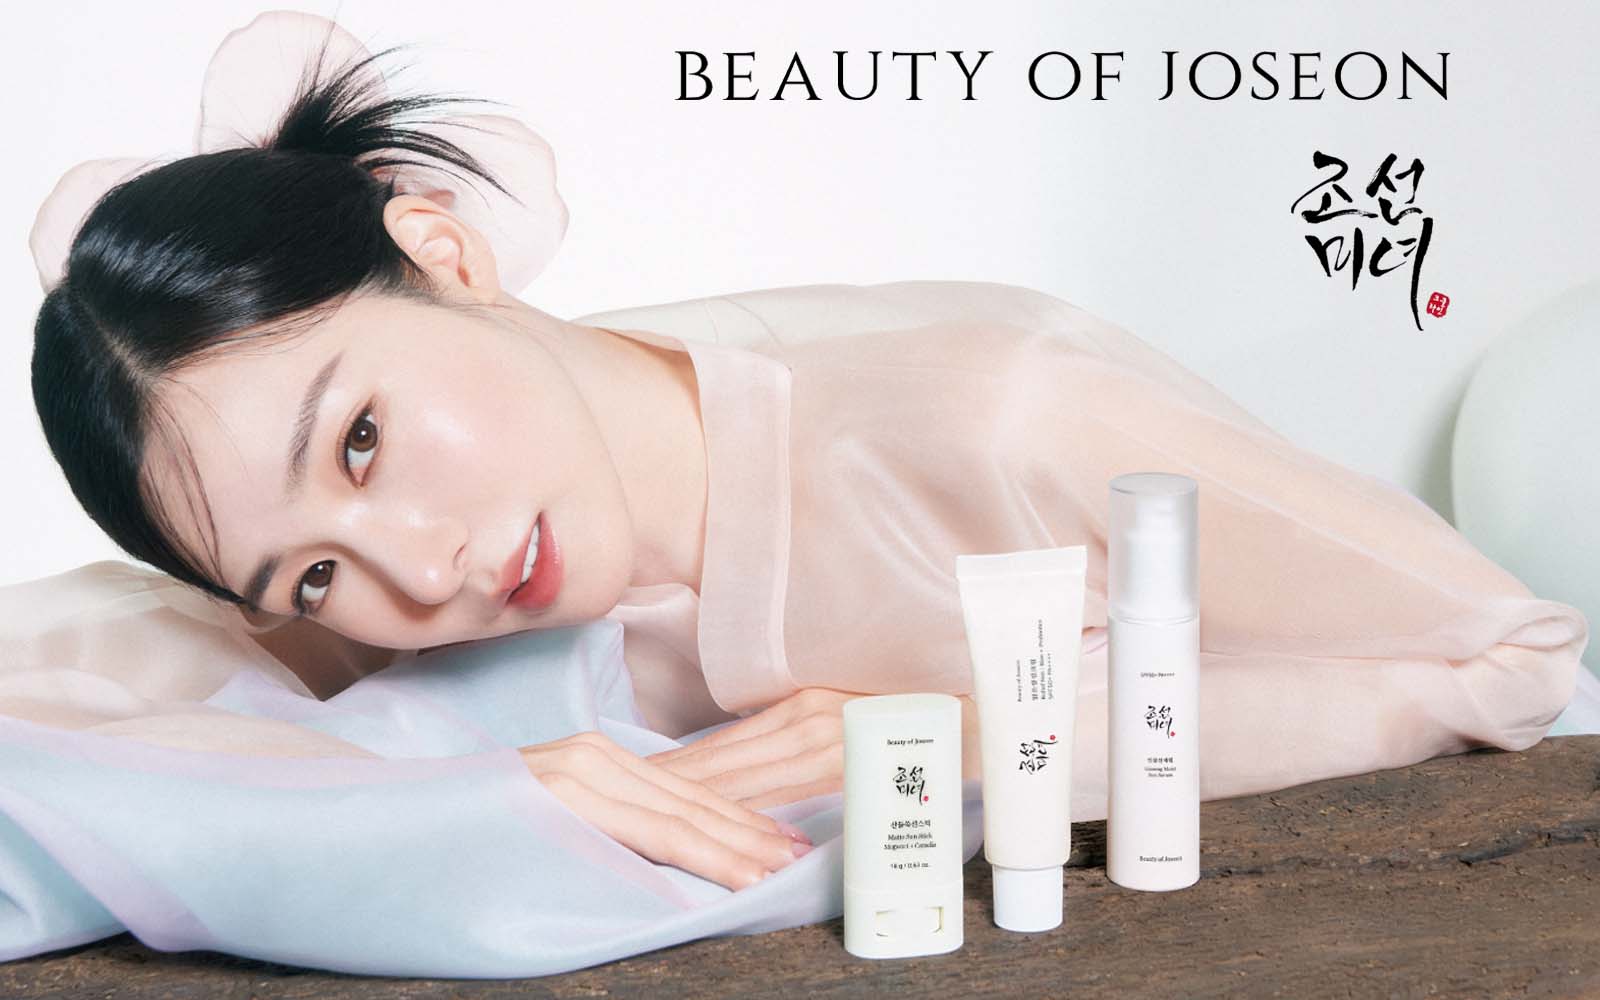 Beauty of Joseon Brand model with beautiful skin wearing traditional clothe in front of skincare products from Beauty of Joseon